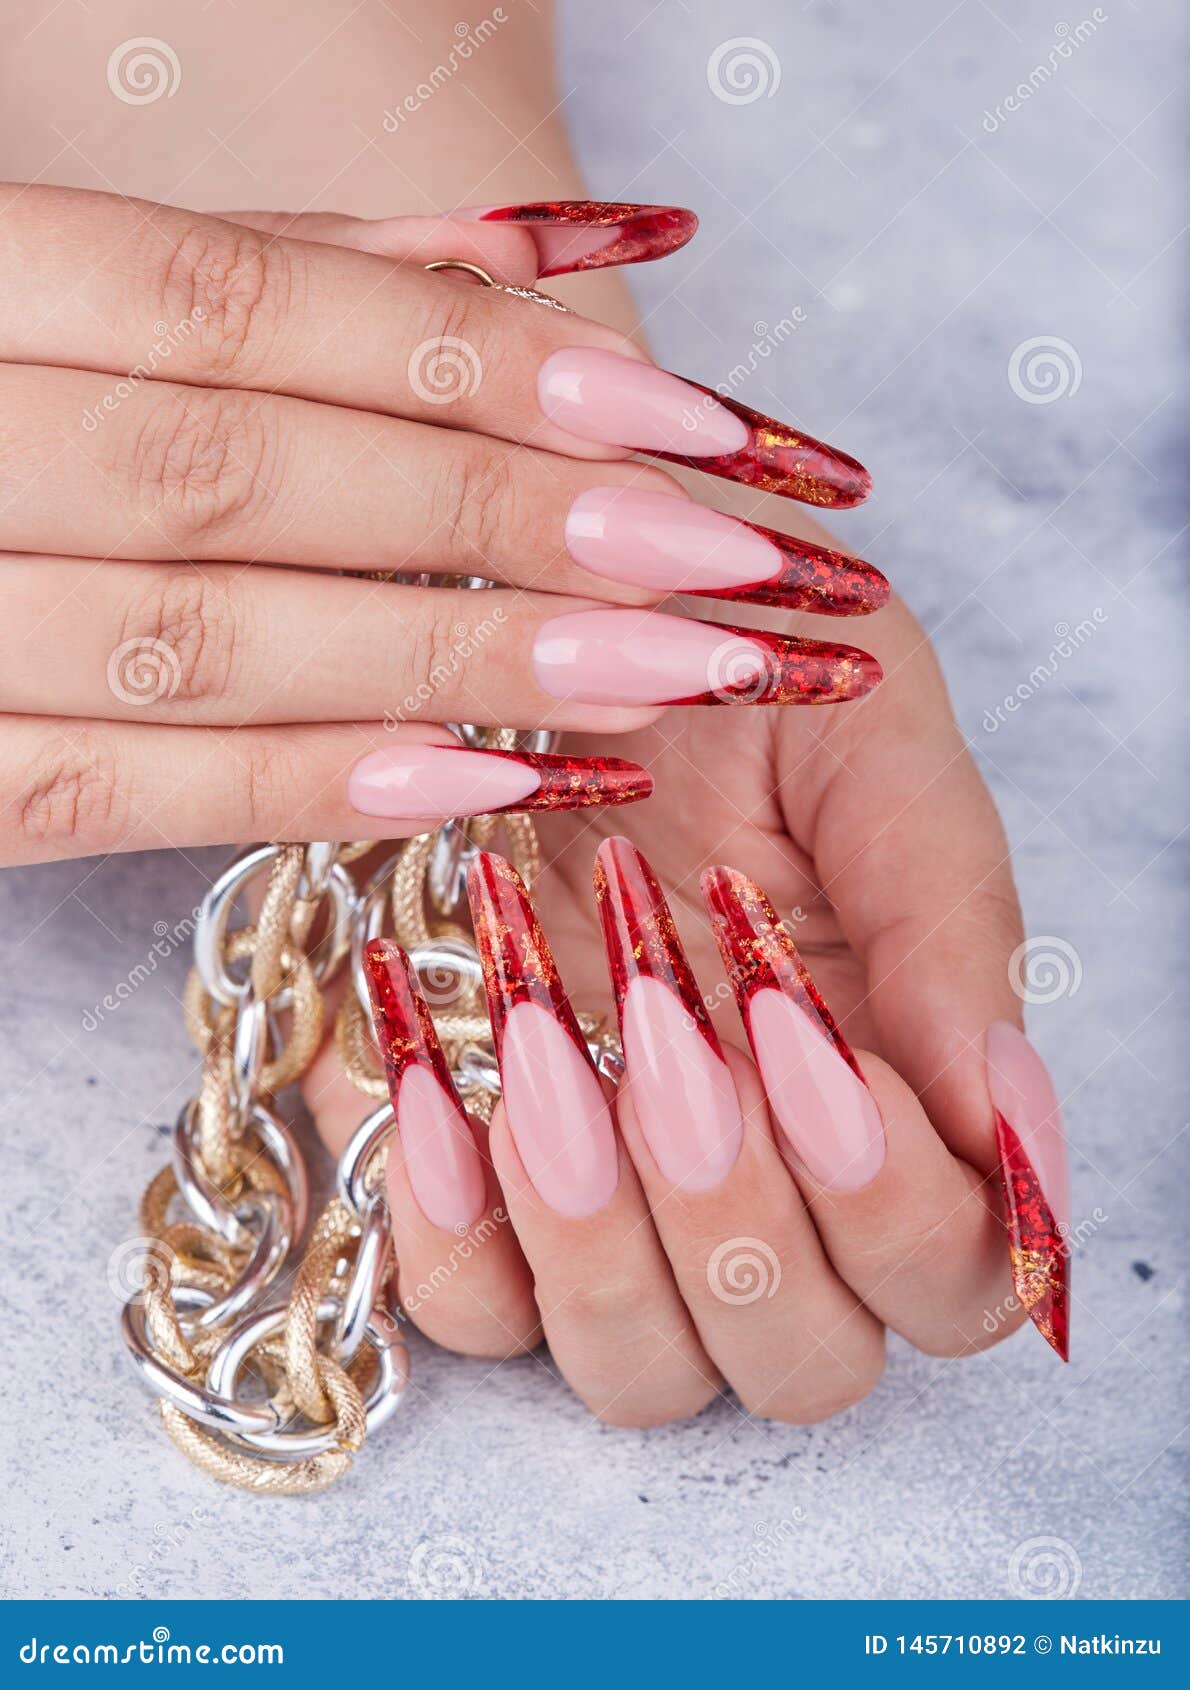 Hands With Long Red Artificial French Manicured Nails ...